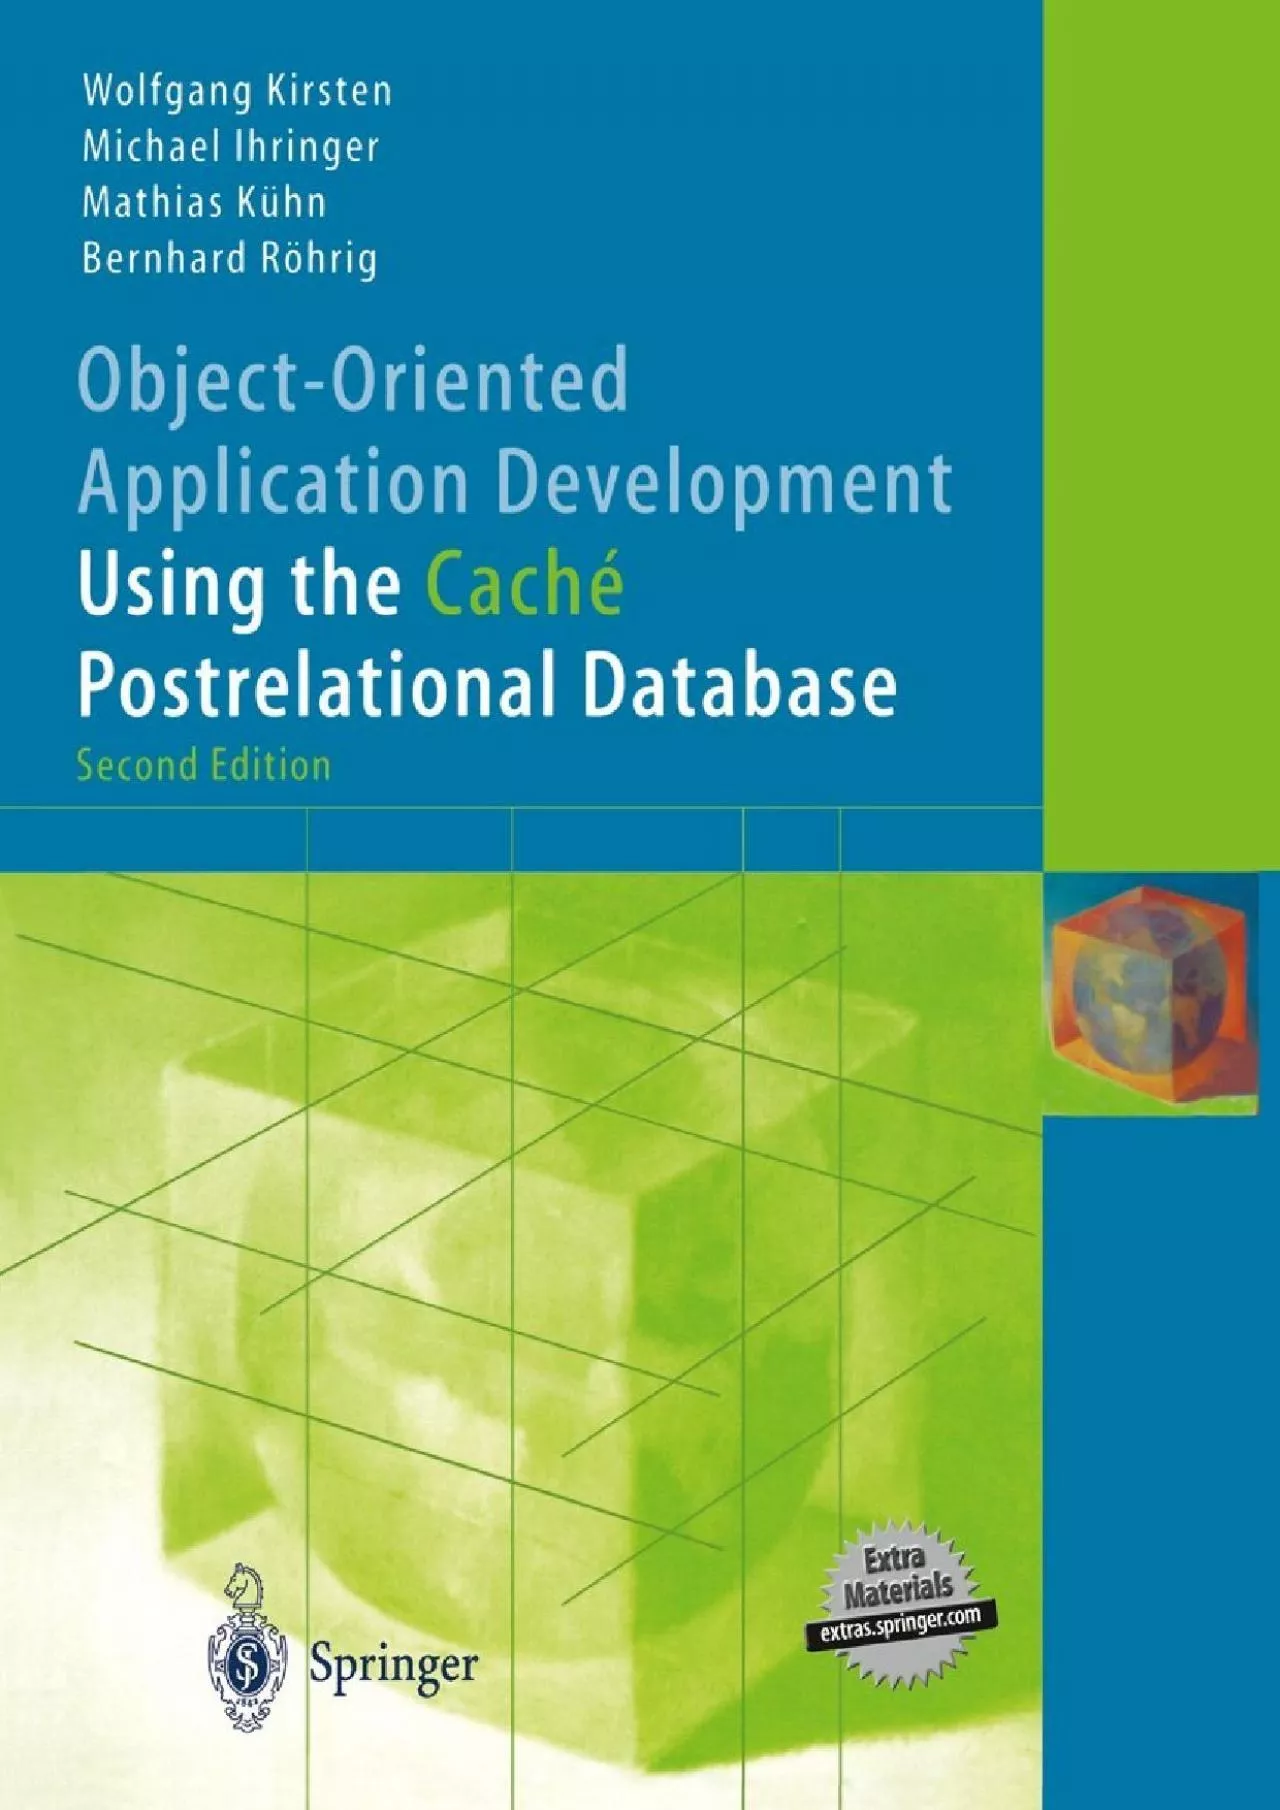 [PDF]-Object-Oriented Application Development Using the Caché Postrelational Database